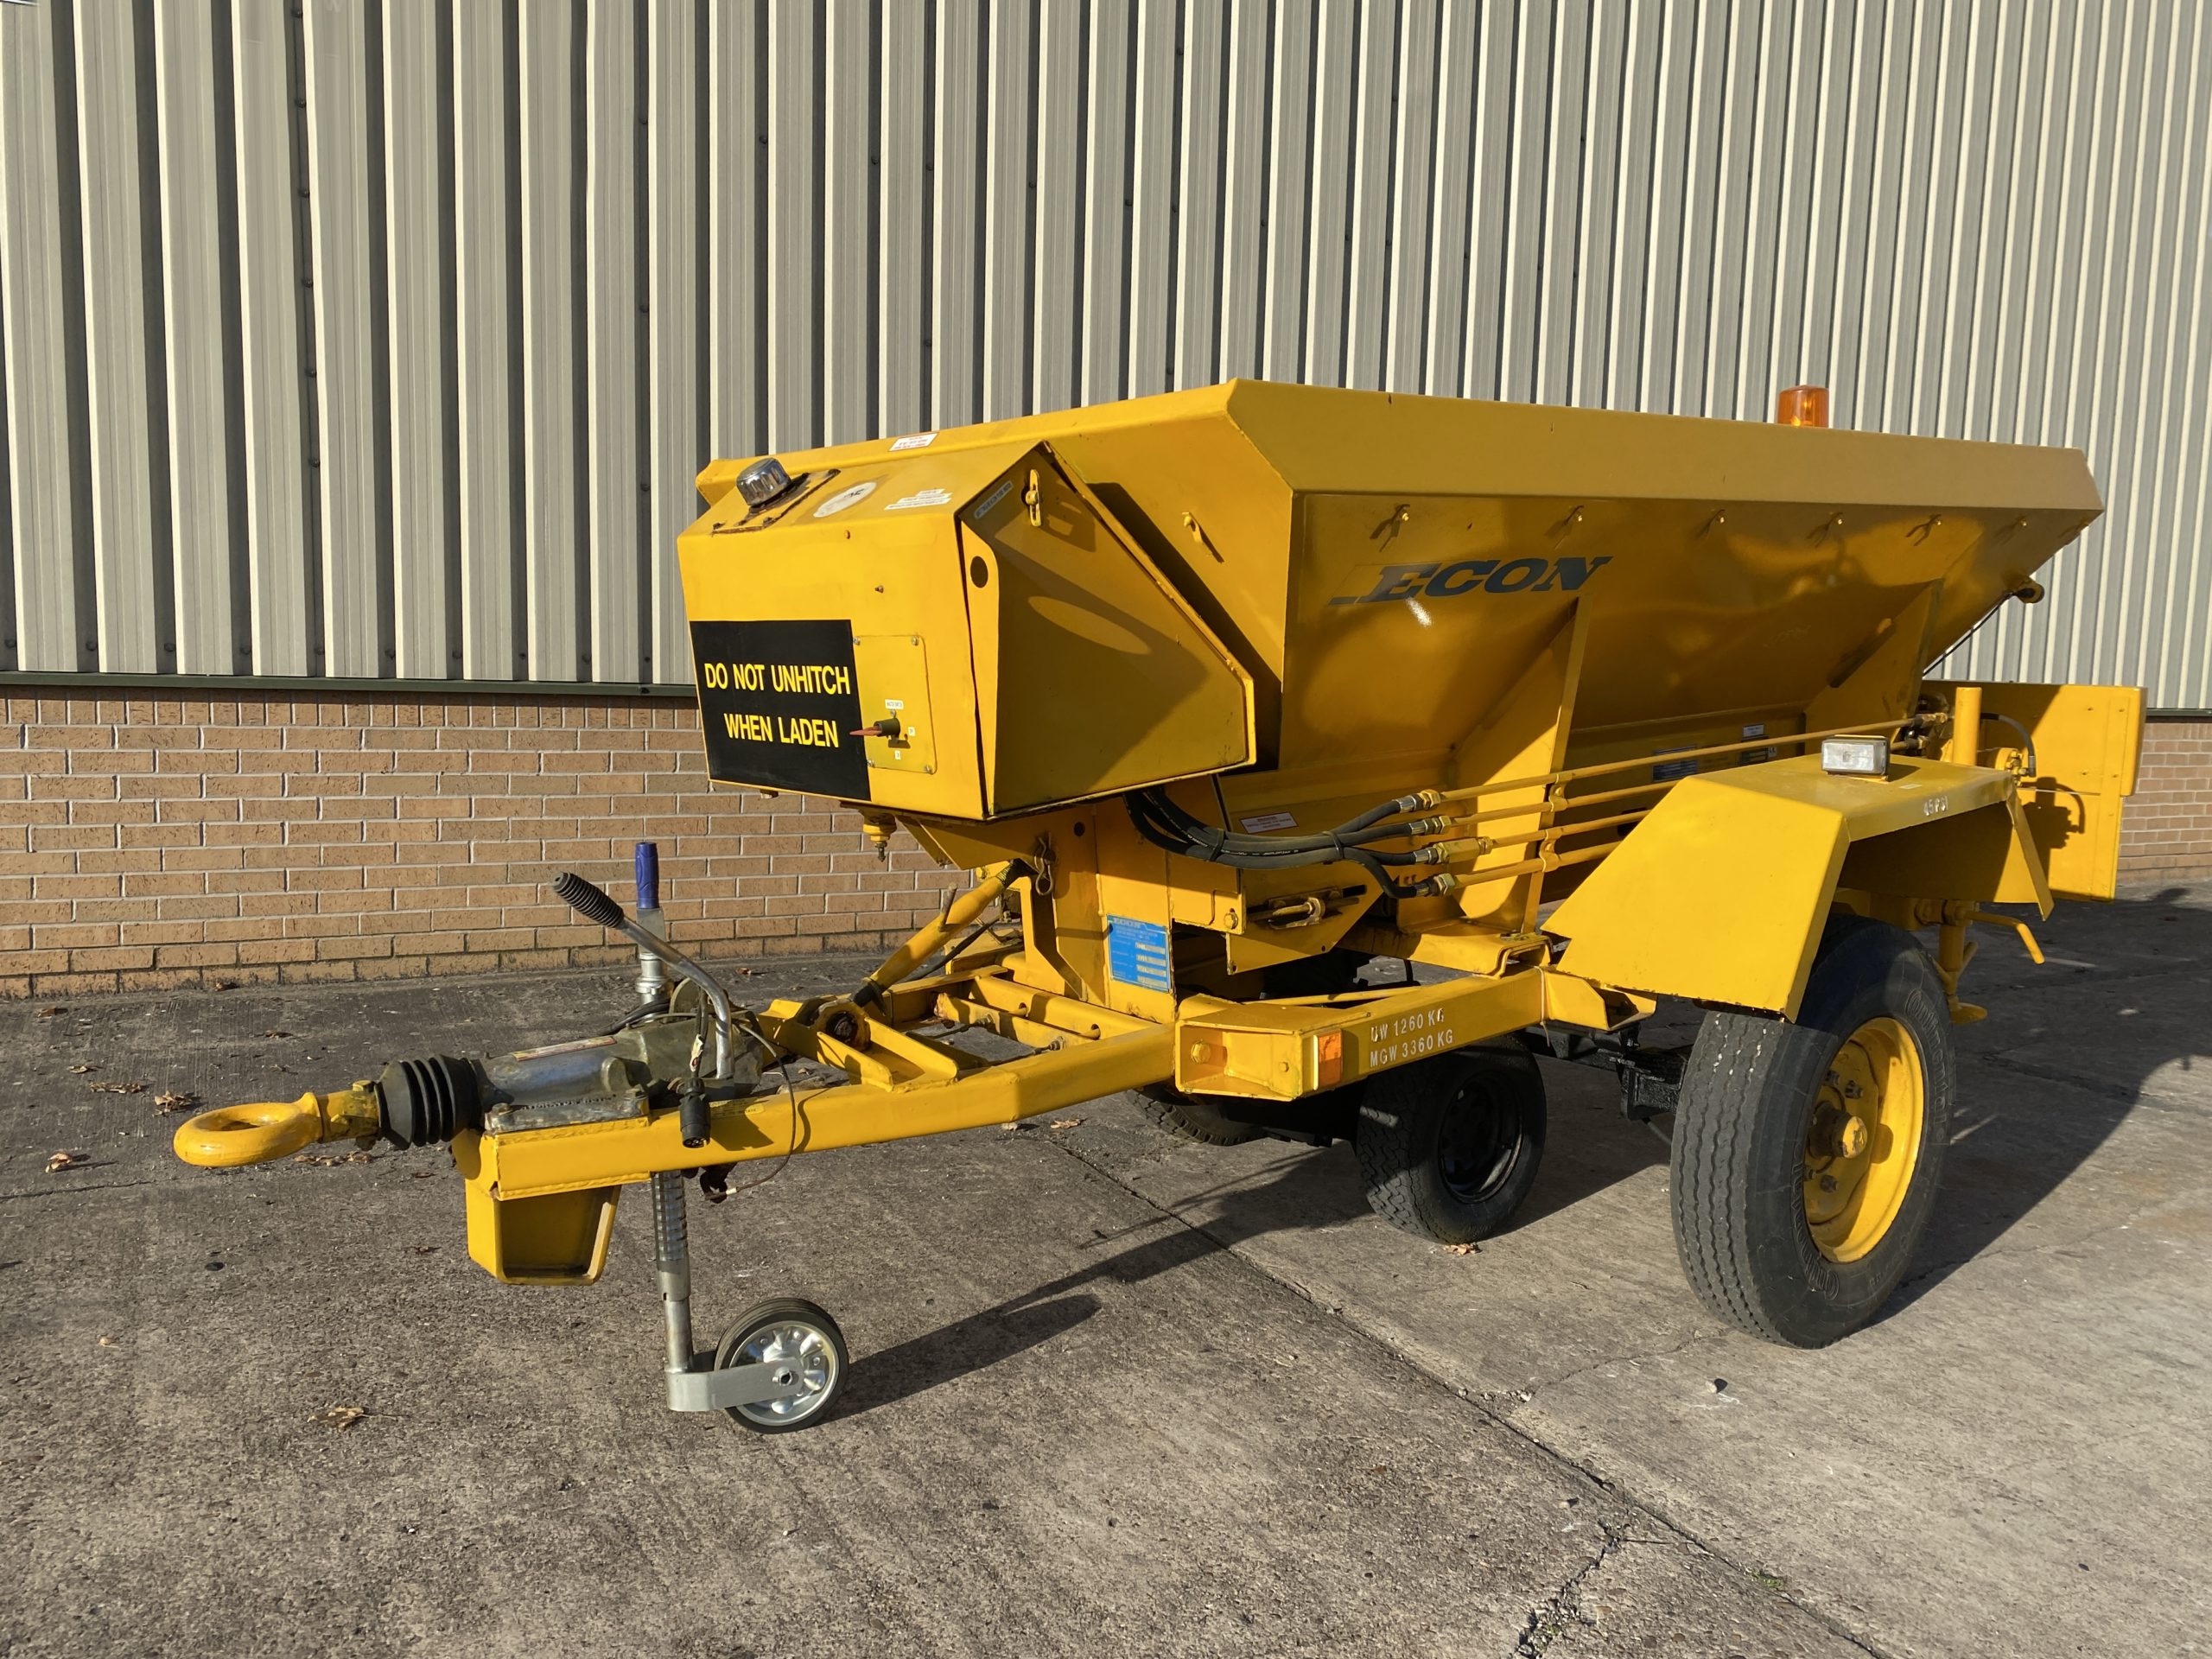 Econ towed gritter trailer - 50404 - Govsales of mod surplus ex army trucks, ex army land rovers and other military vehicles for sale